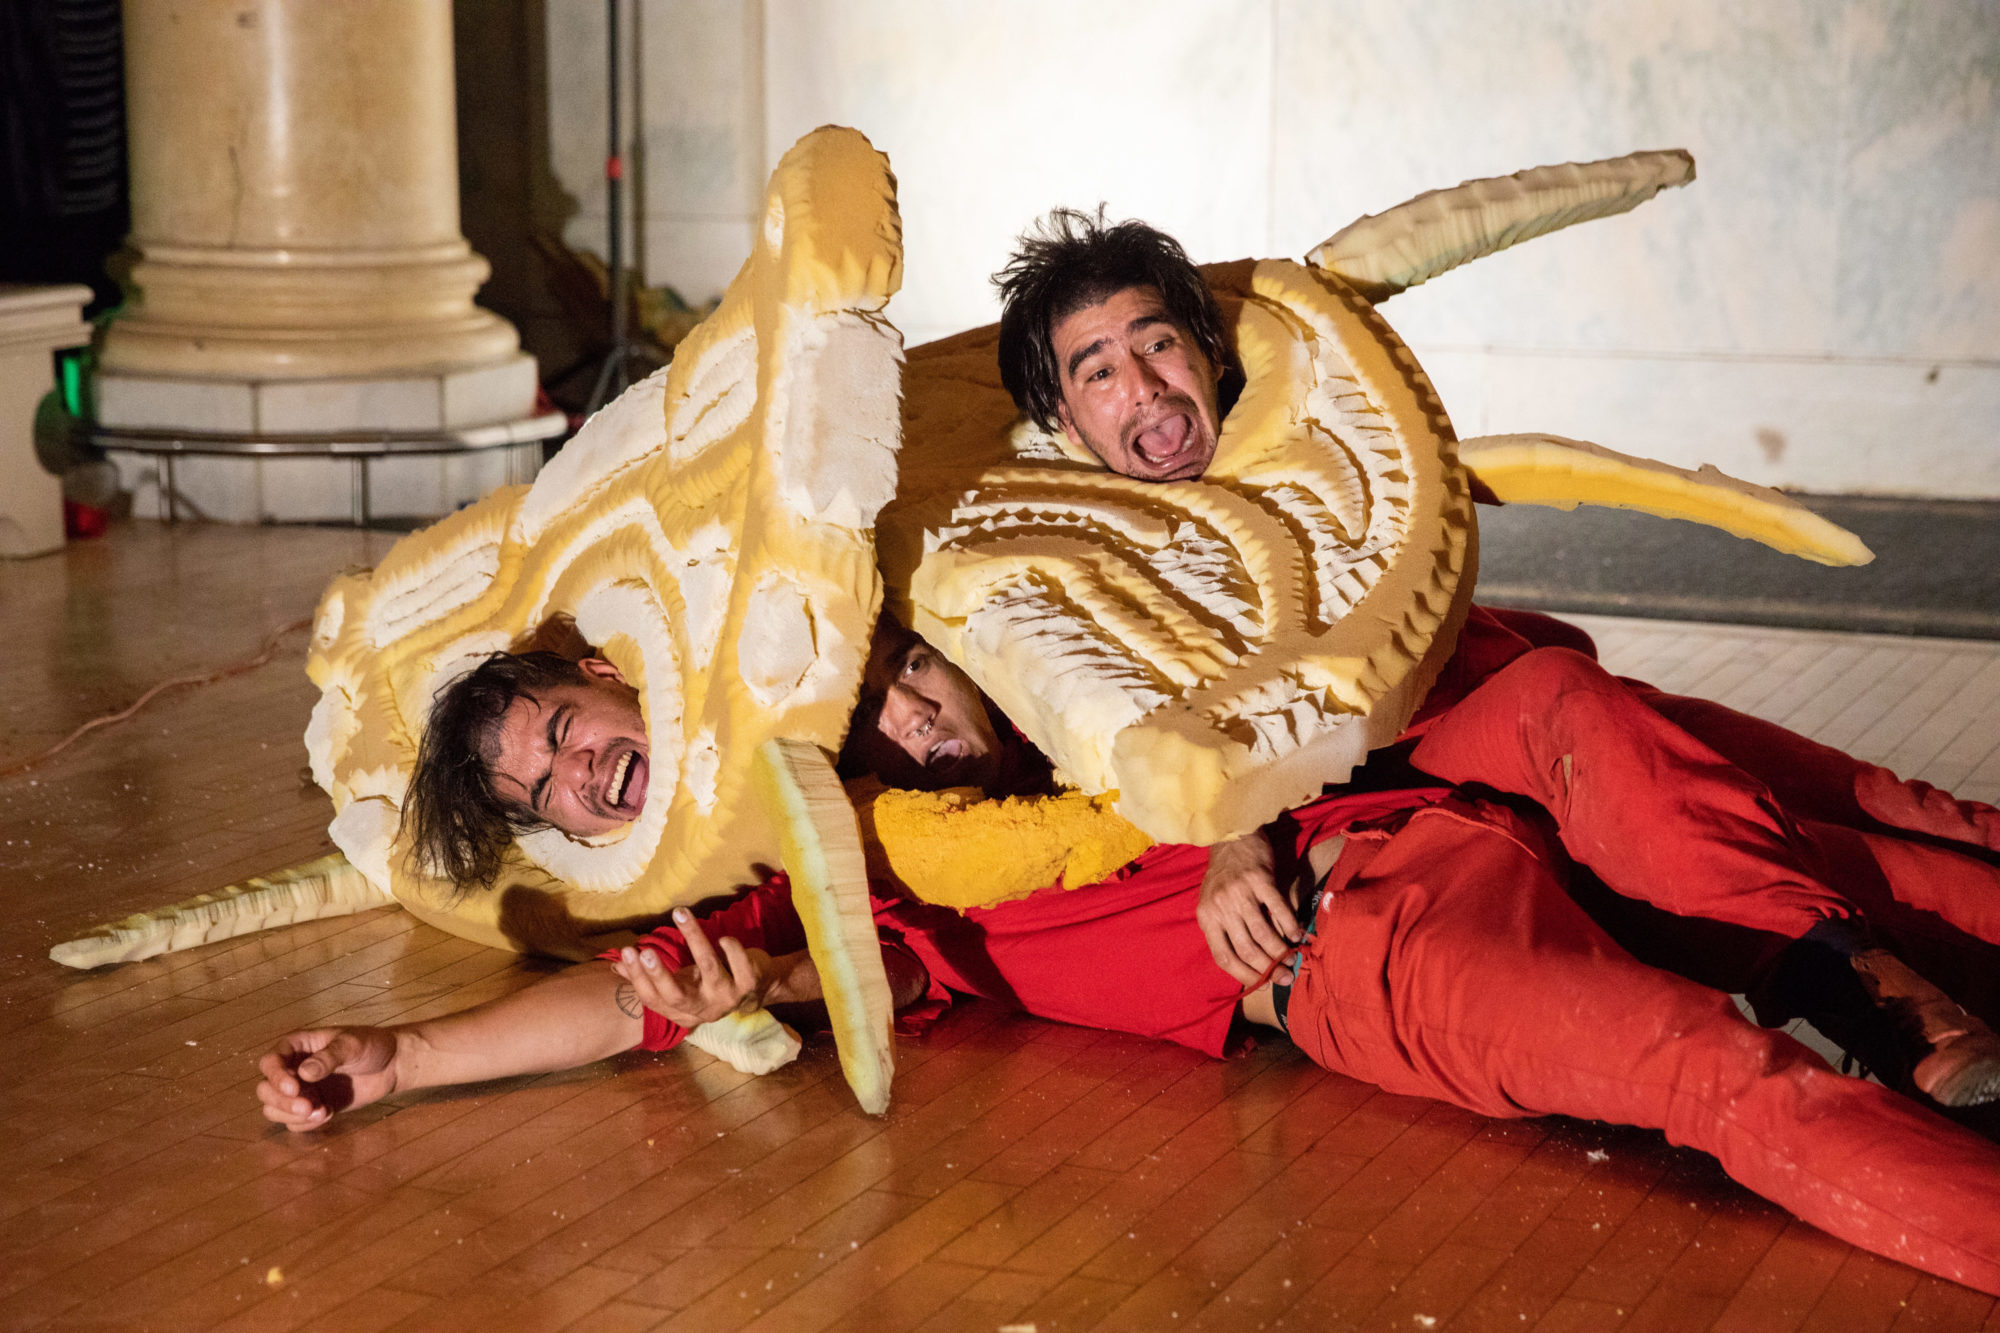 three people wearing red entangled on the floor, with their necks in a yellow foam structure